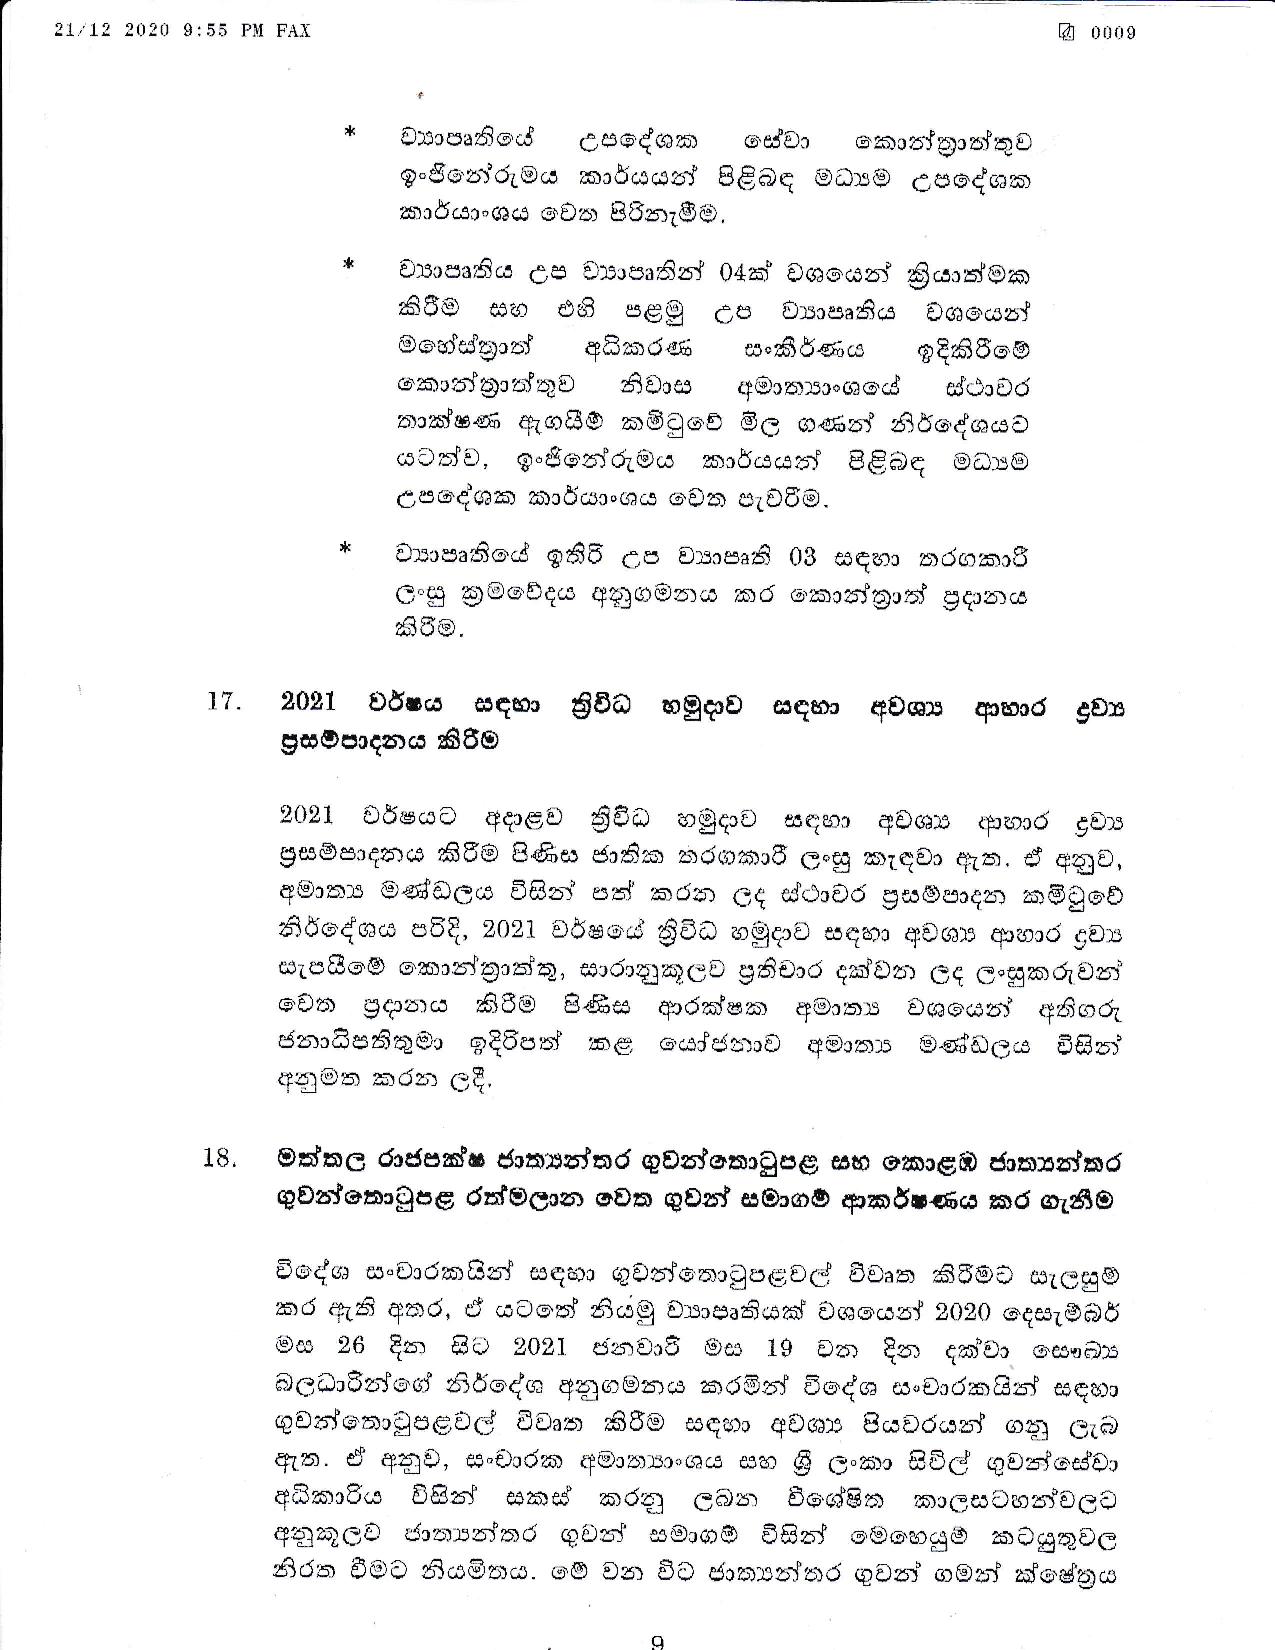 Cabinet Decision on 21.12.2020 page 009